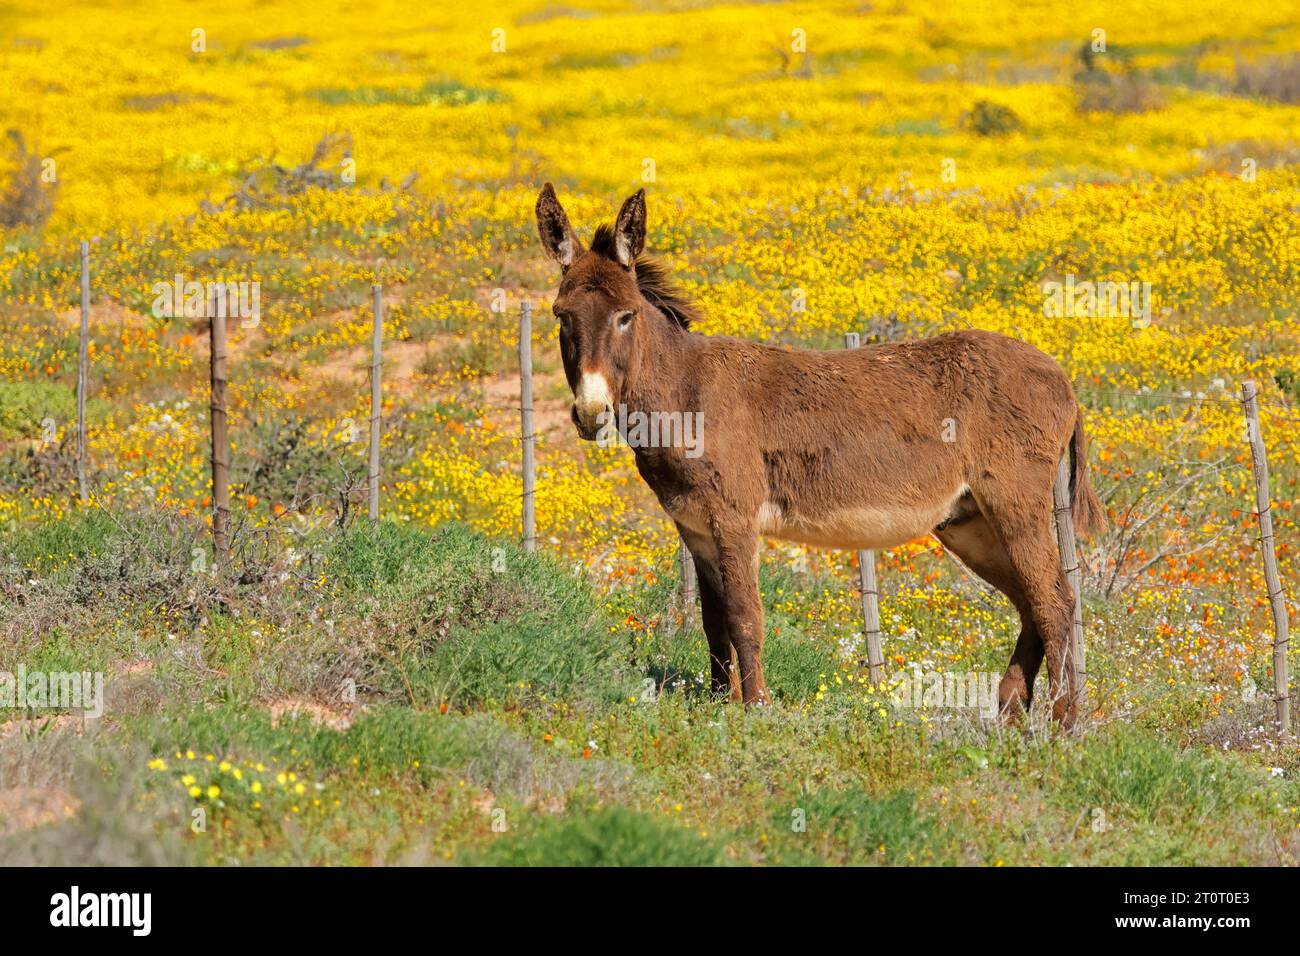 A free-range donkey standing in a field with yellow wild flowers, Namaqualand, South Africa Stock Photo